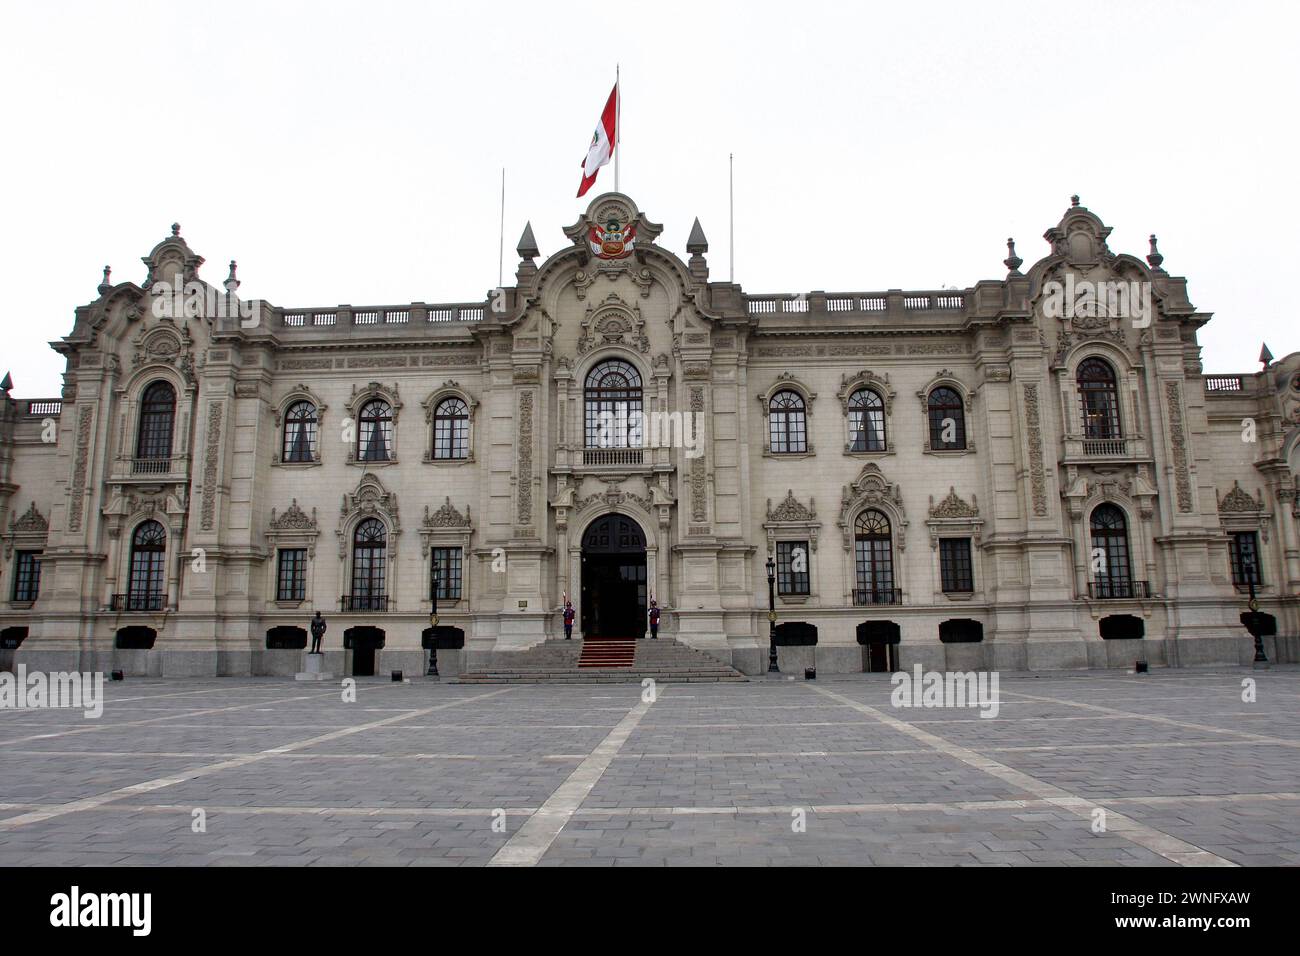 Lima, Peru - jul 09, 2008 - The Government Palace, also known as the House of Pizarro at the Plaza Mayor or Plaza de Armas in Lima, Peru Stock Photo